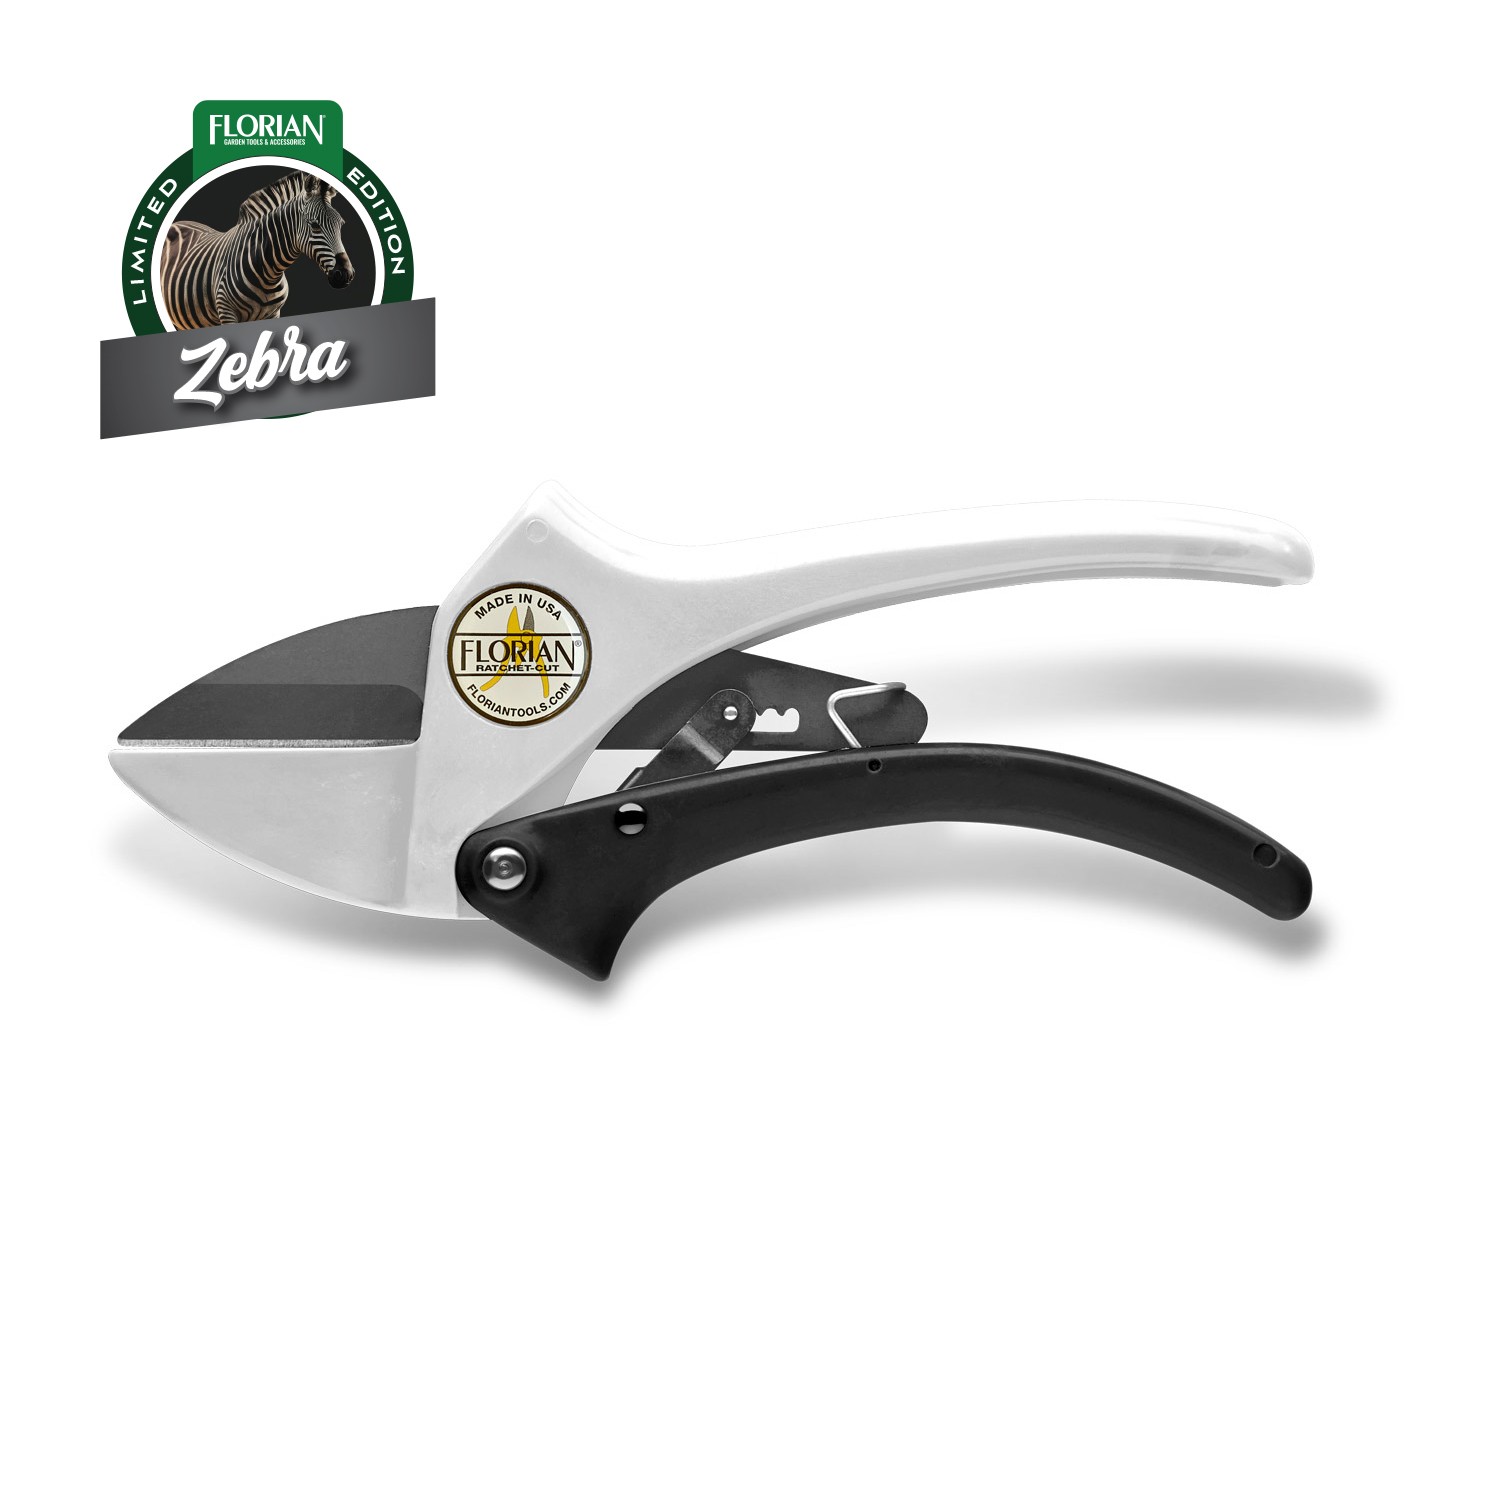 Special Edition - The Zebra 701 Ratcheting Pruner